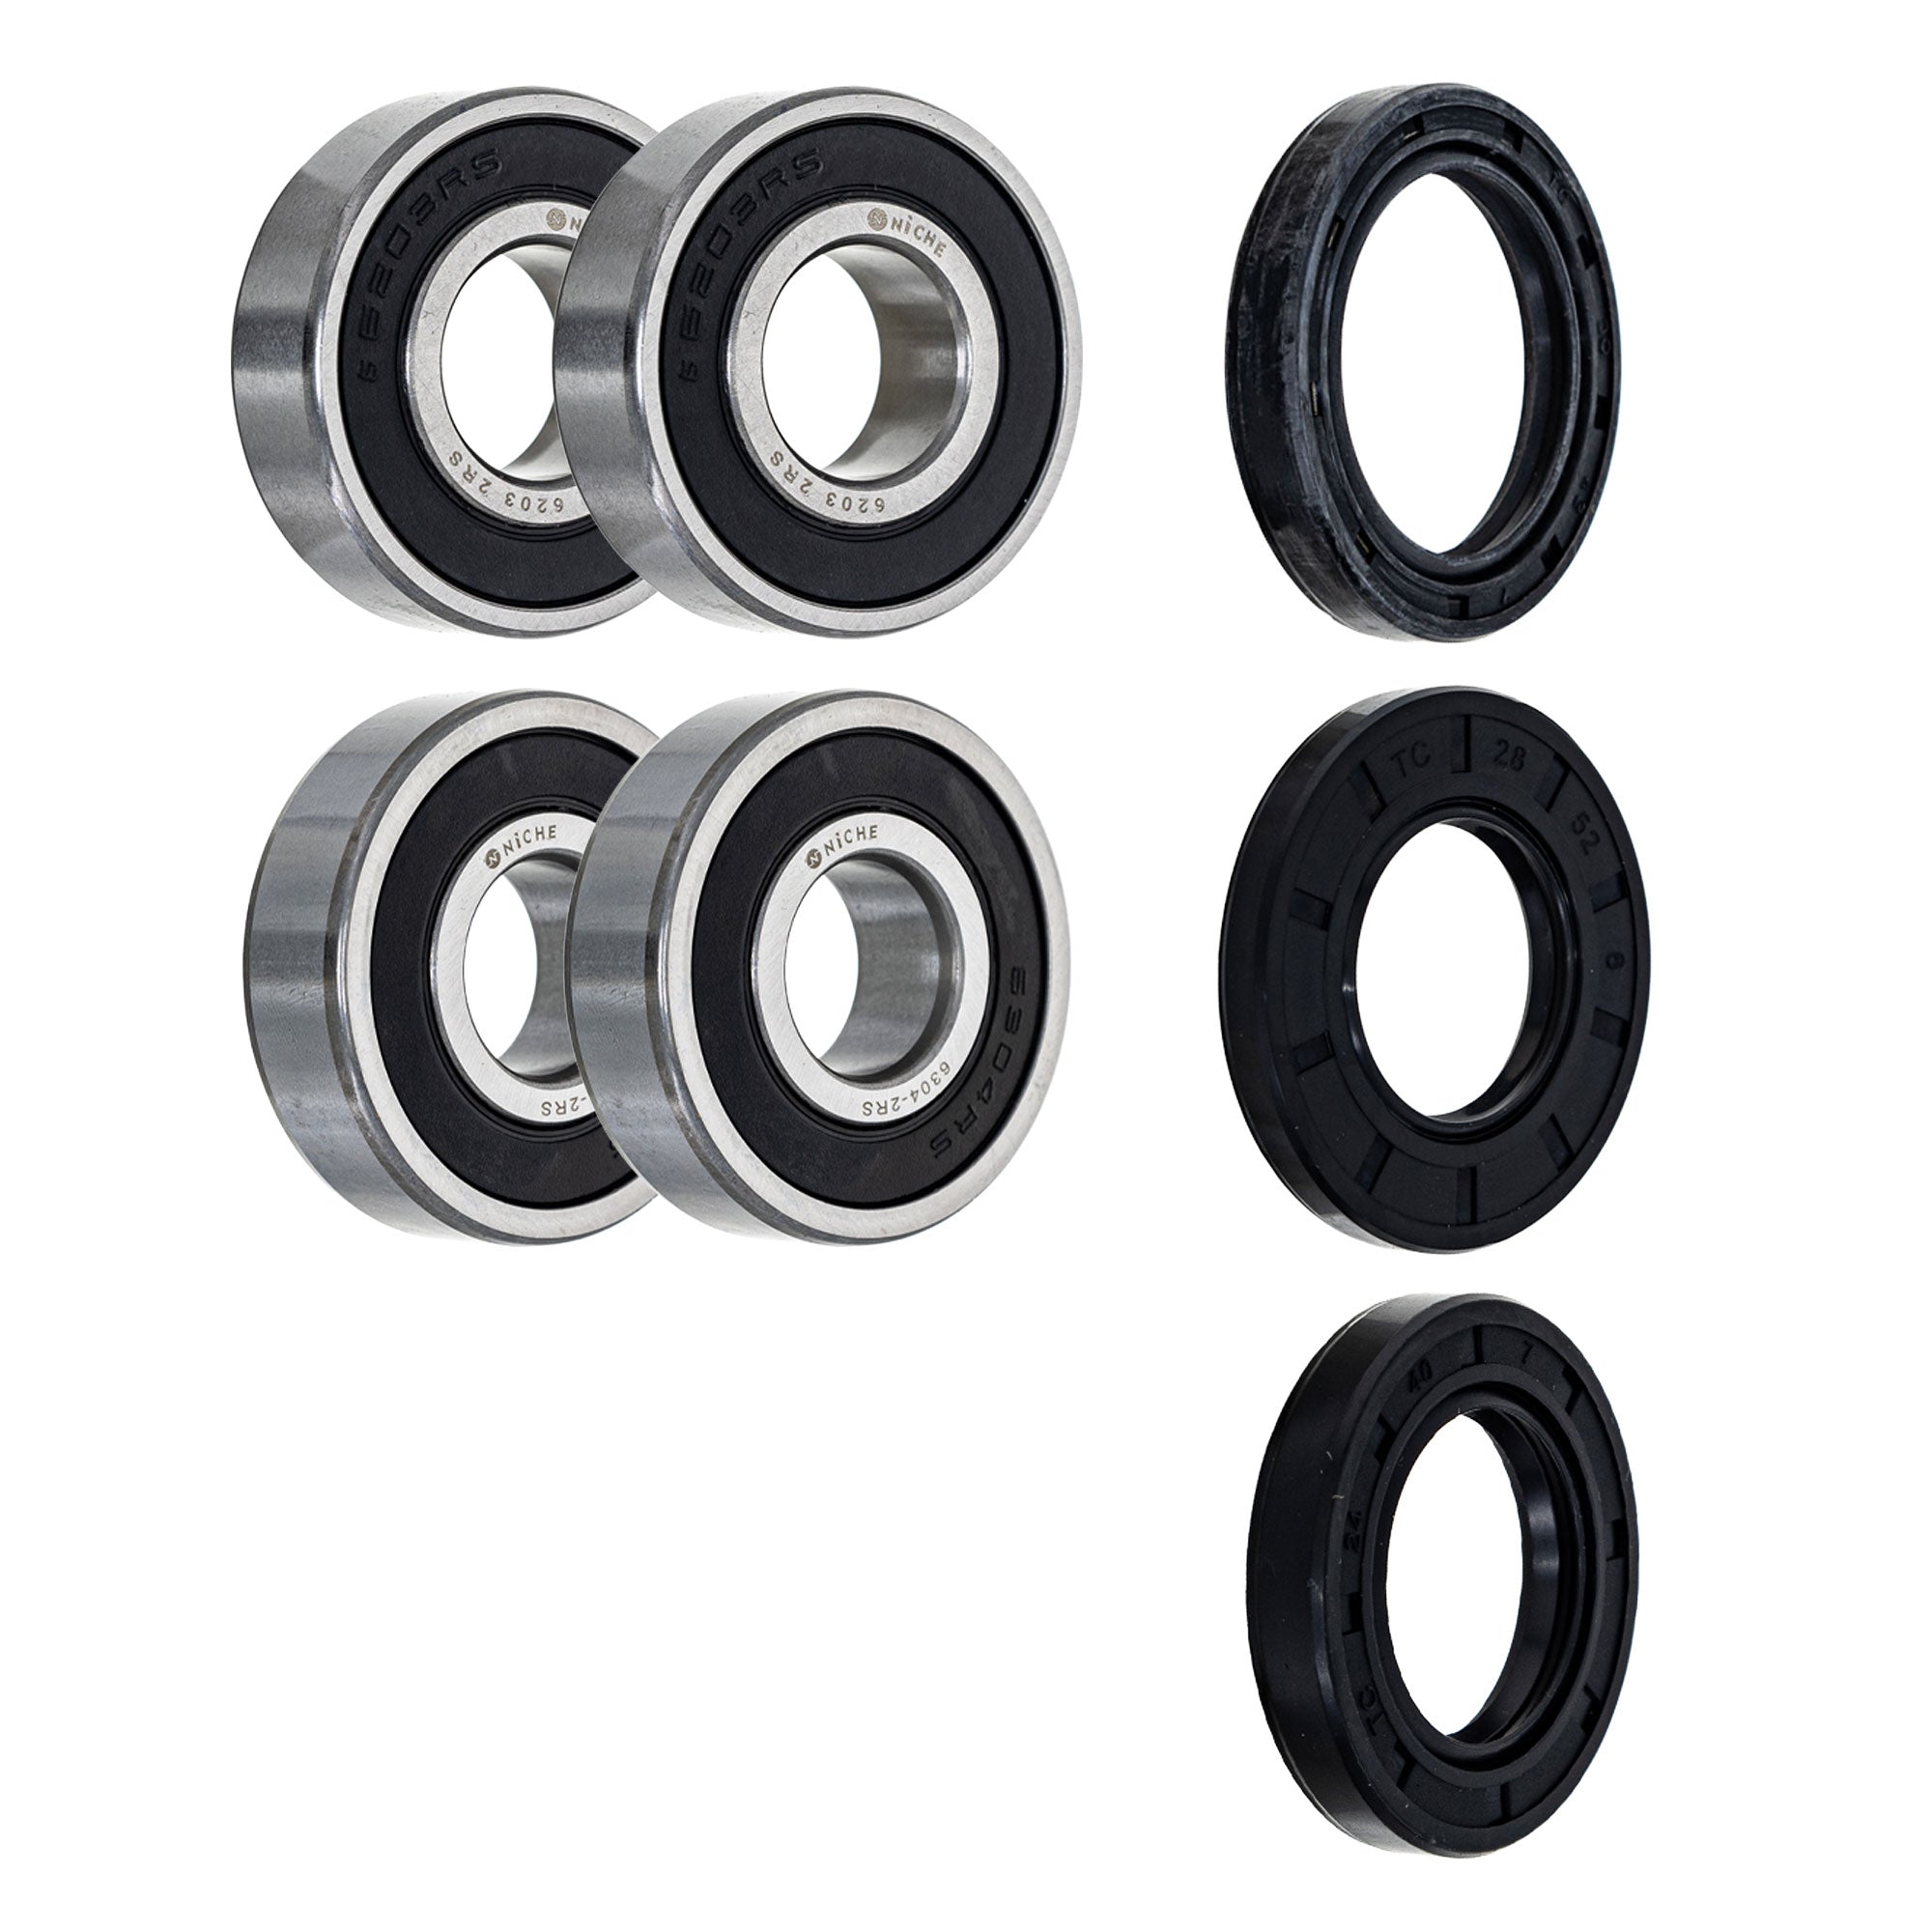 Wheel Bearing Seal Kit for zOTHER Ref No Concours NICHE MK1008563